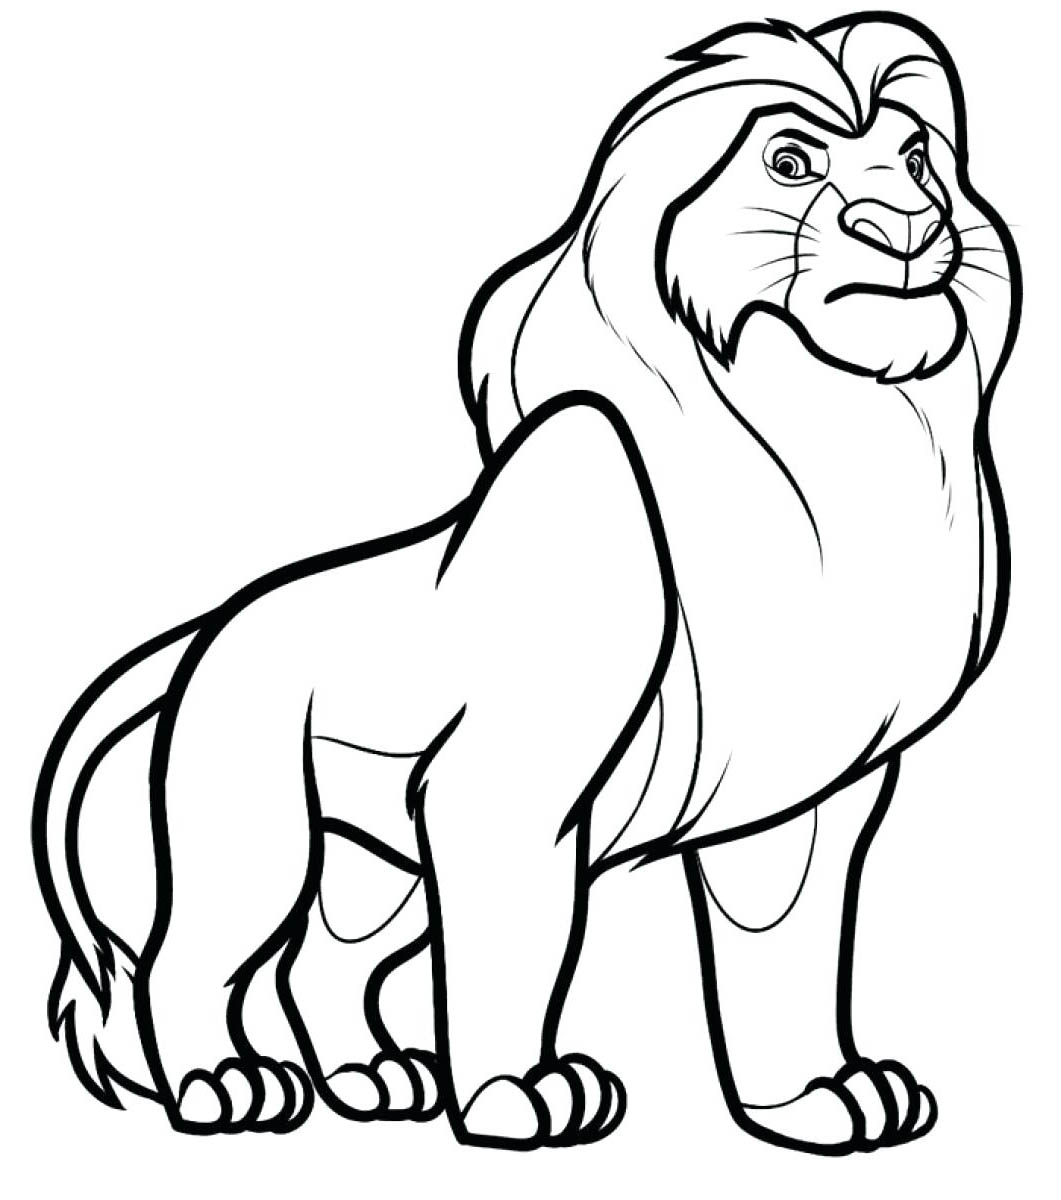 Coloring Page Lion – Draw Calm